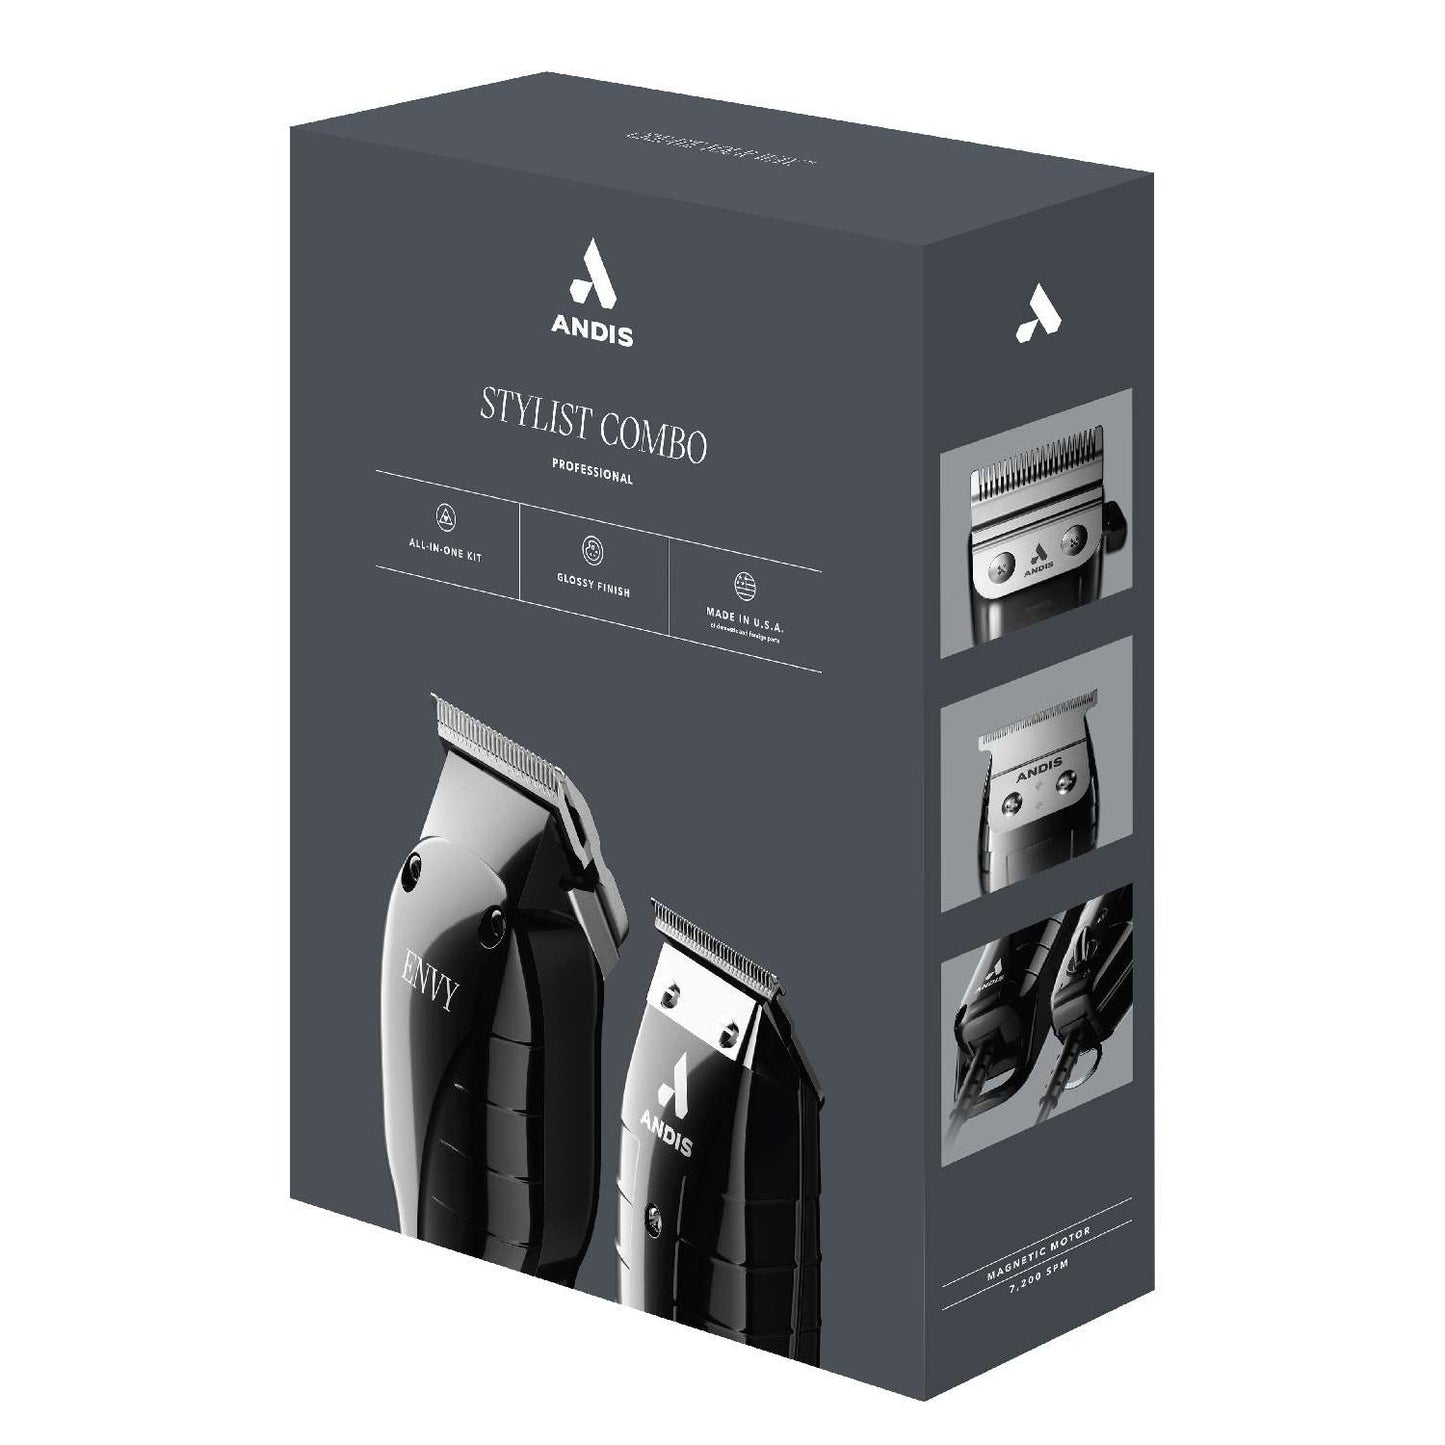 Andis Professional Stylist Combo All-In-One Kit